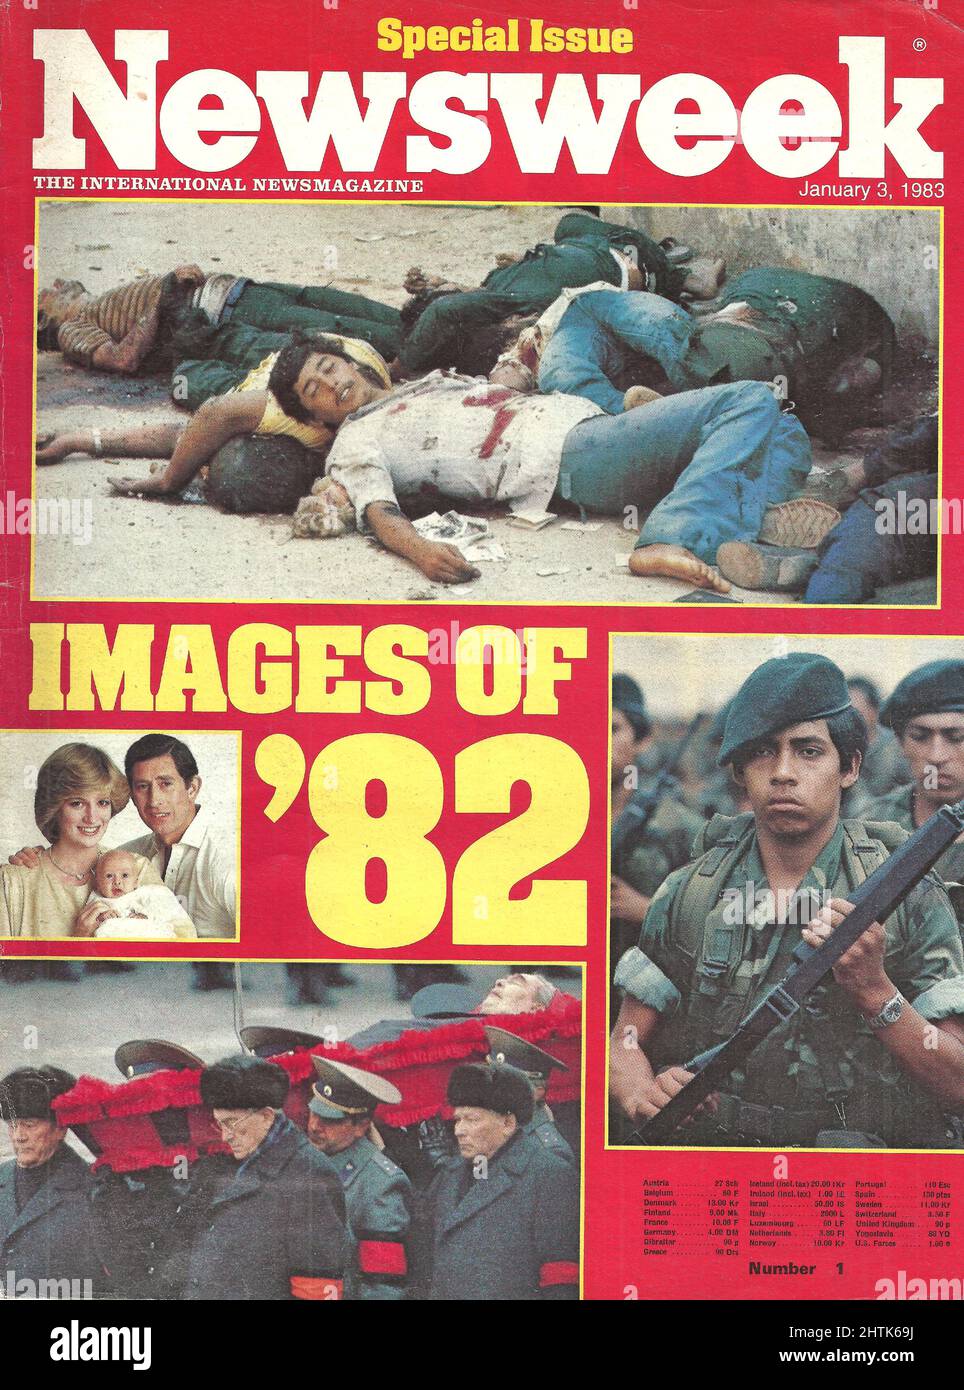 Special Issue Newsweek cover Images of 1982, January 3 1983 Stock Photo